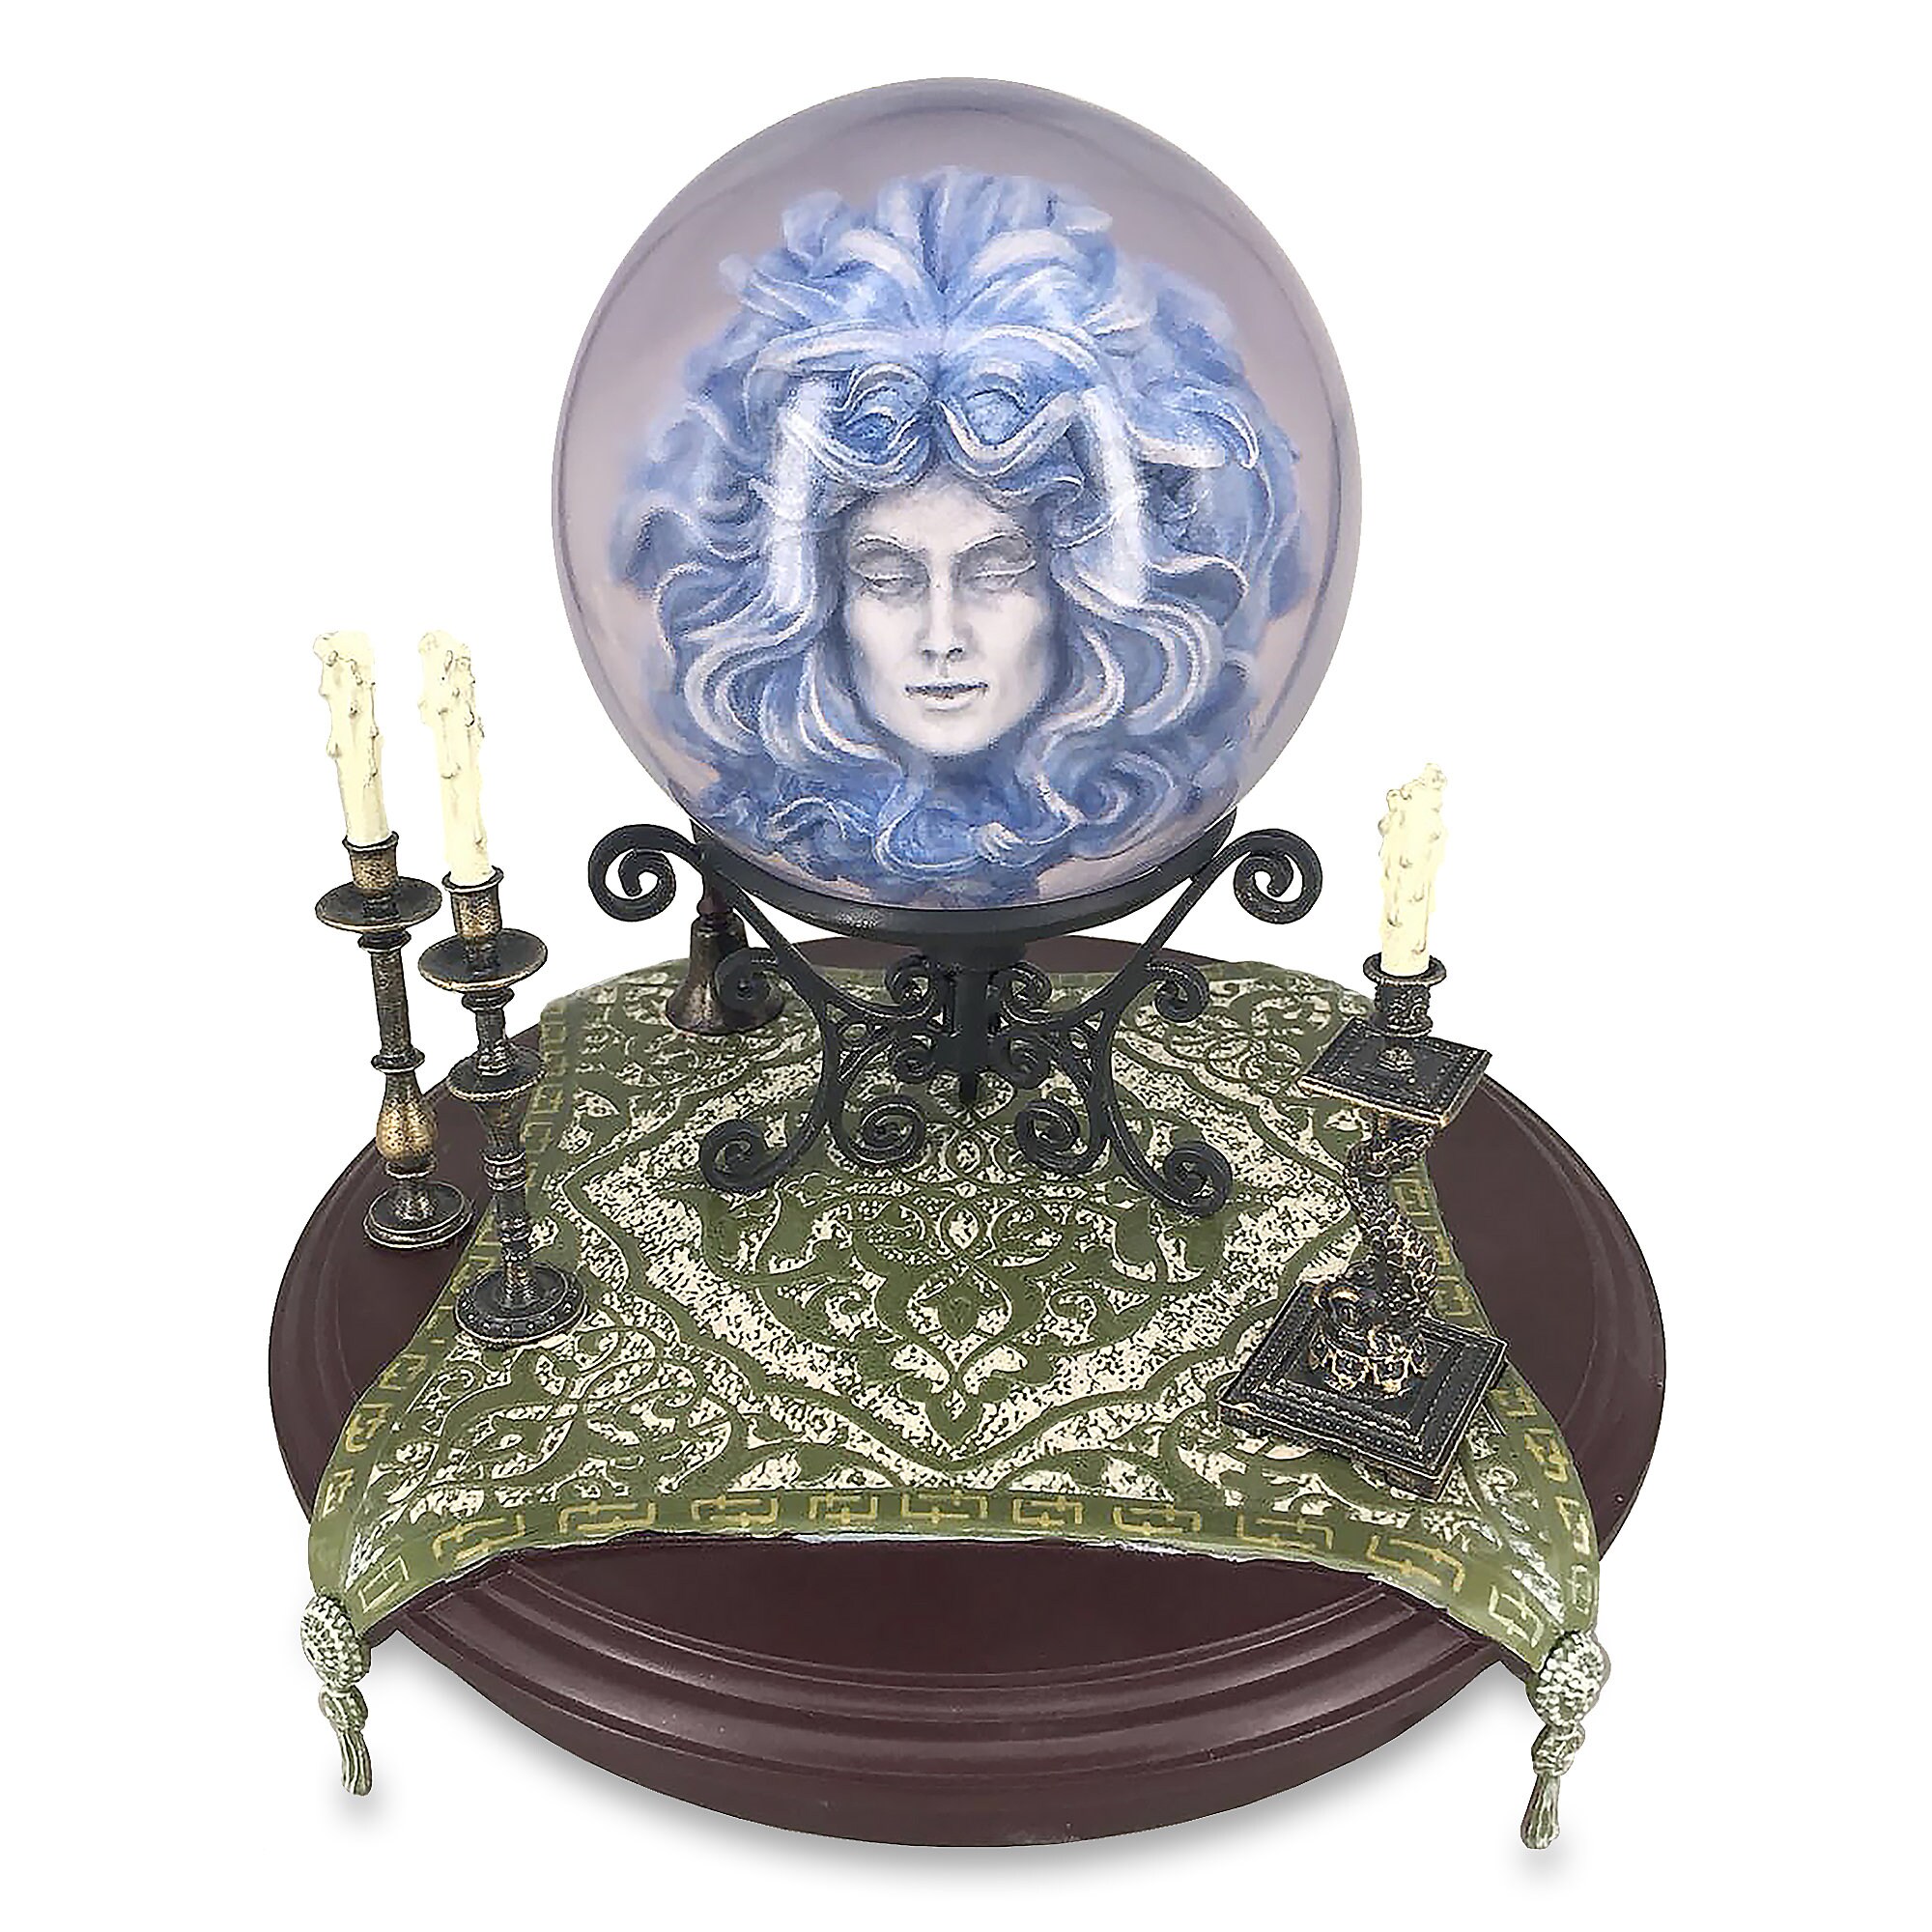 Madame Leota Figurine with Crystal Ball - The Haunted Mansion